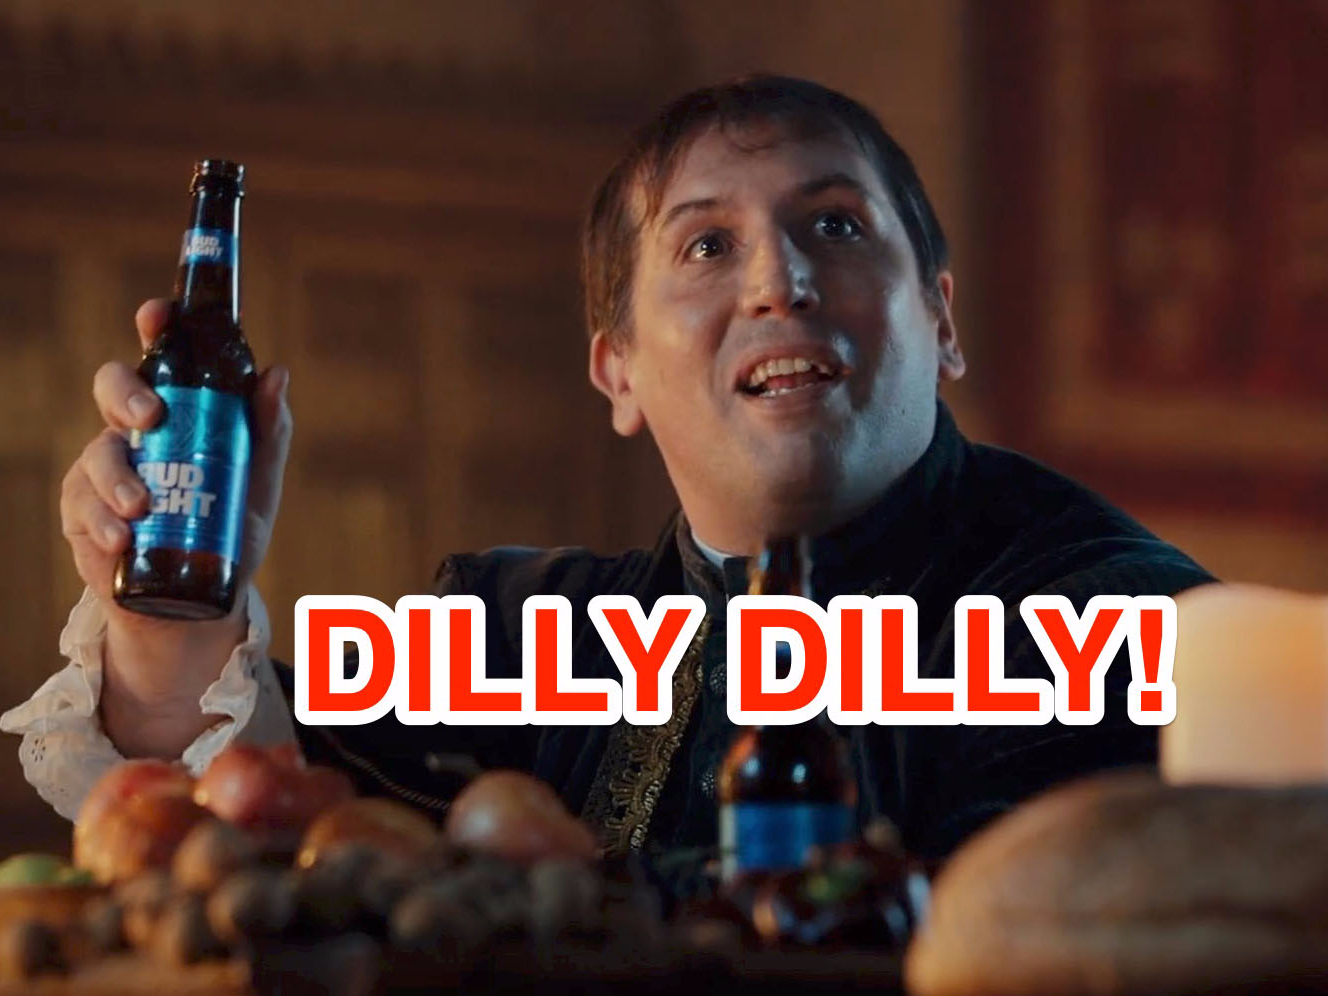 what-dilly-dilly-means--and-how-bud-light-came-up-with-its-viral-campaign.jpg